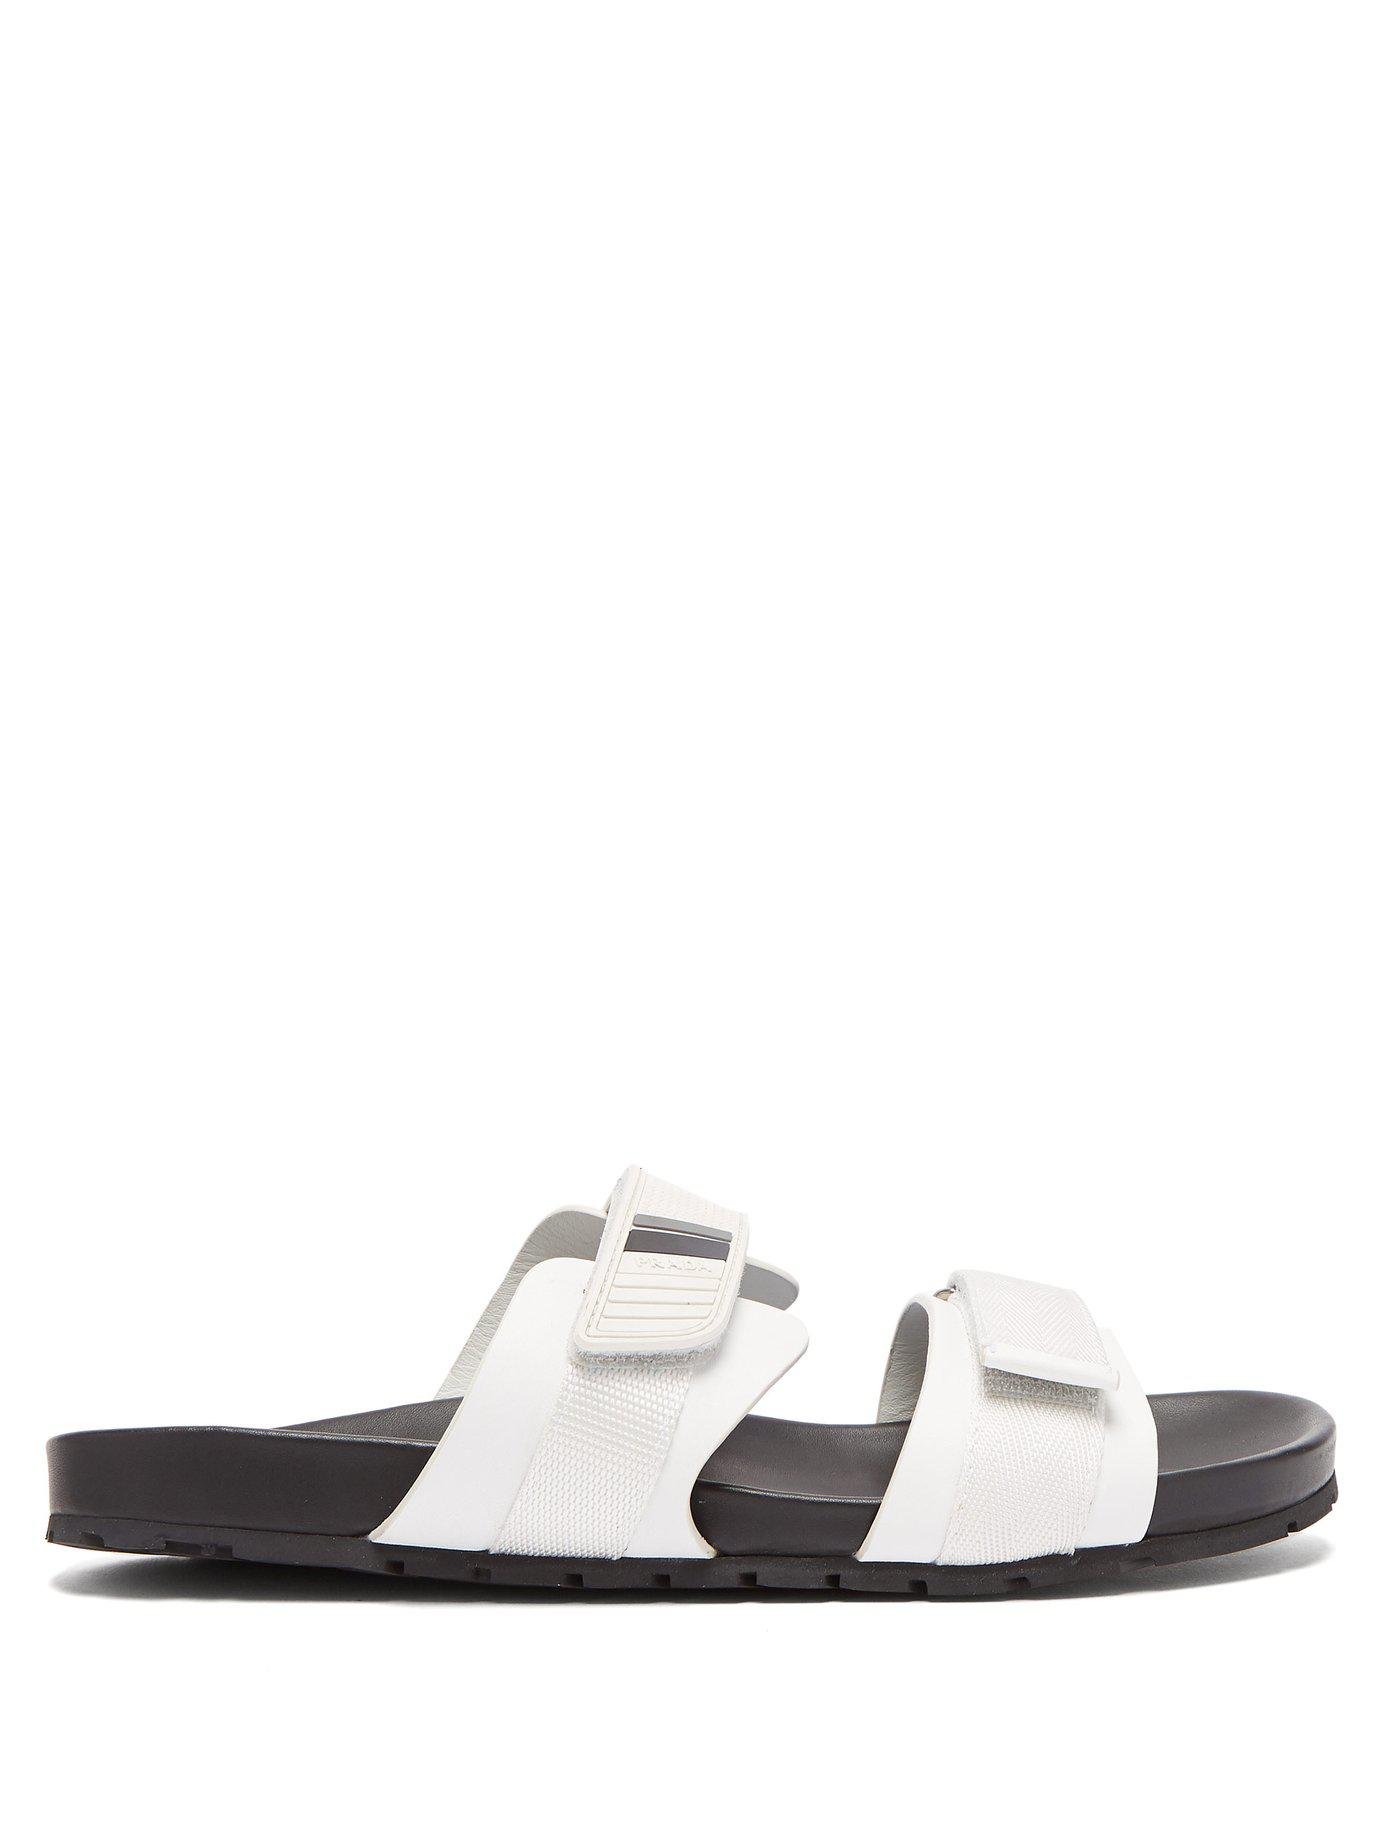 Prada Leather Double-strap Sandals in White for Men - Lyst